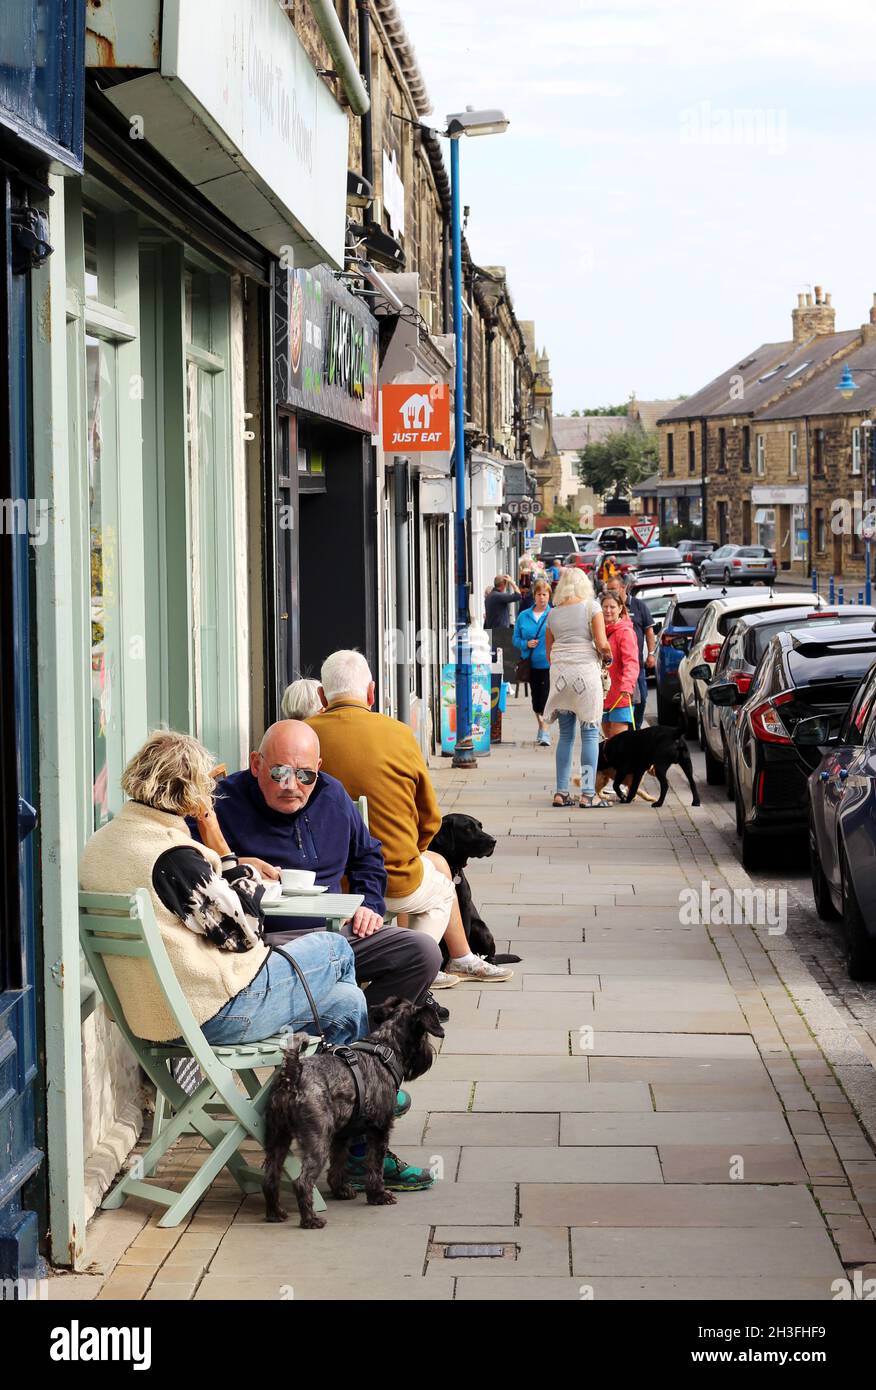 The very dog-friendly town of Amble, on the Northumberland coast, UK, bustling with cafes, seafood restaurants and vibrant beach huts Stock Photo